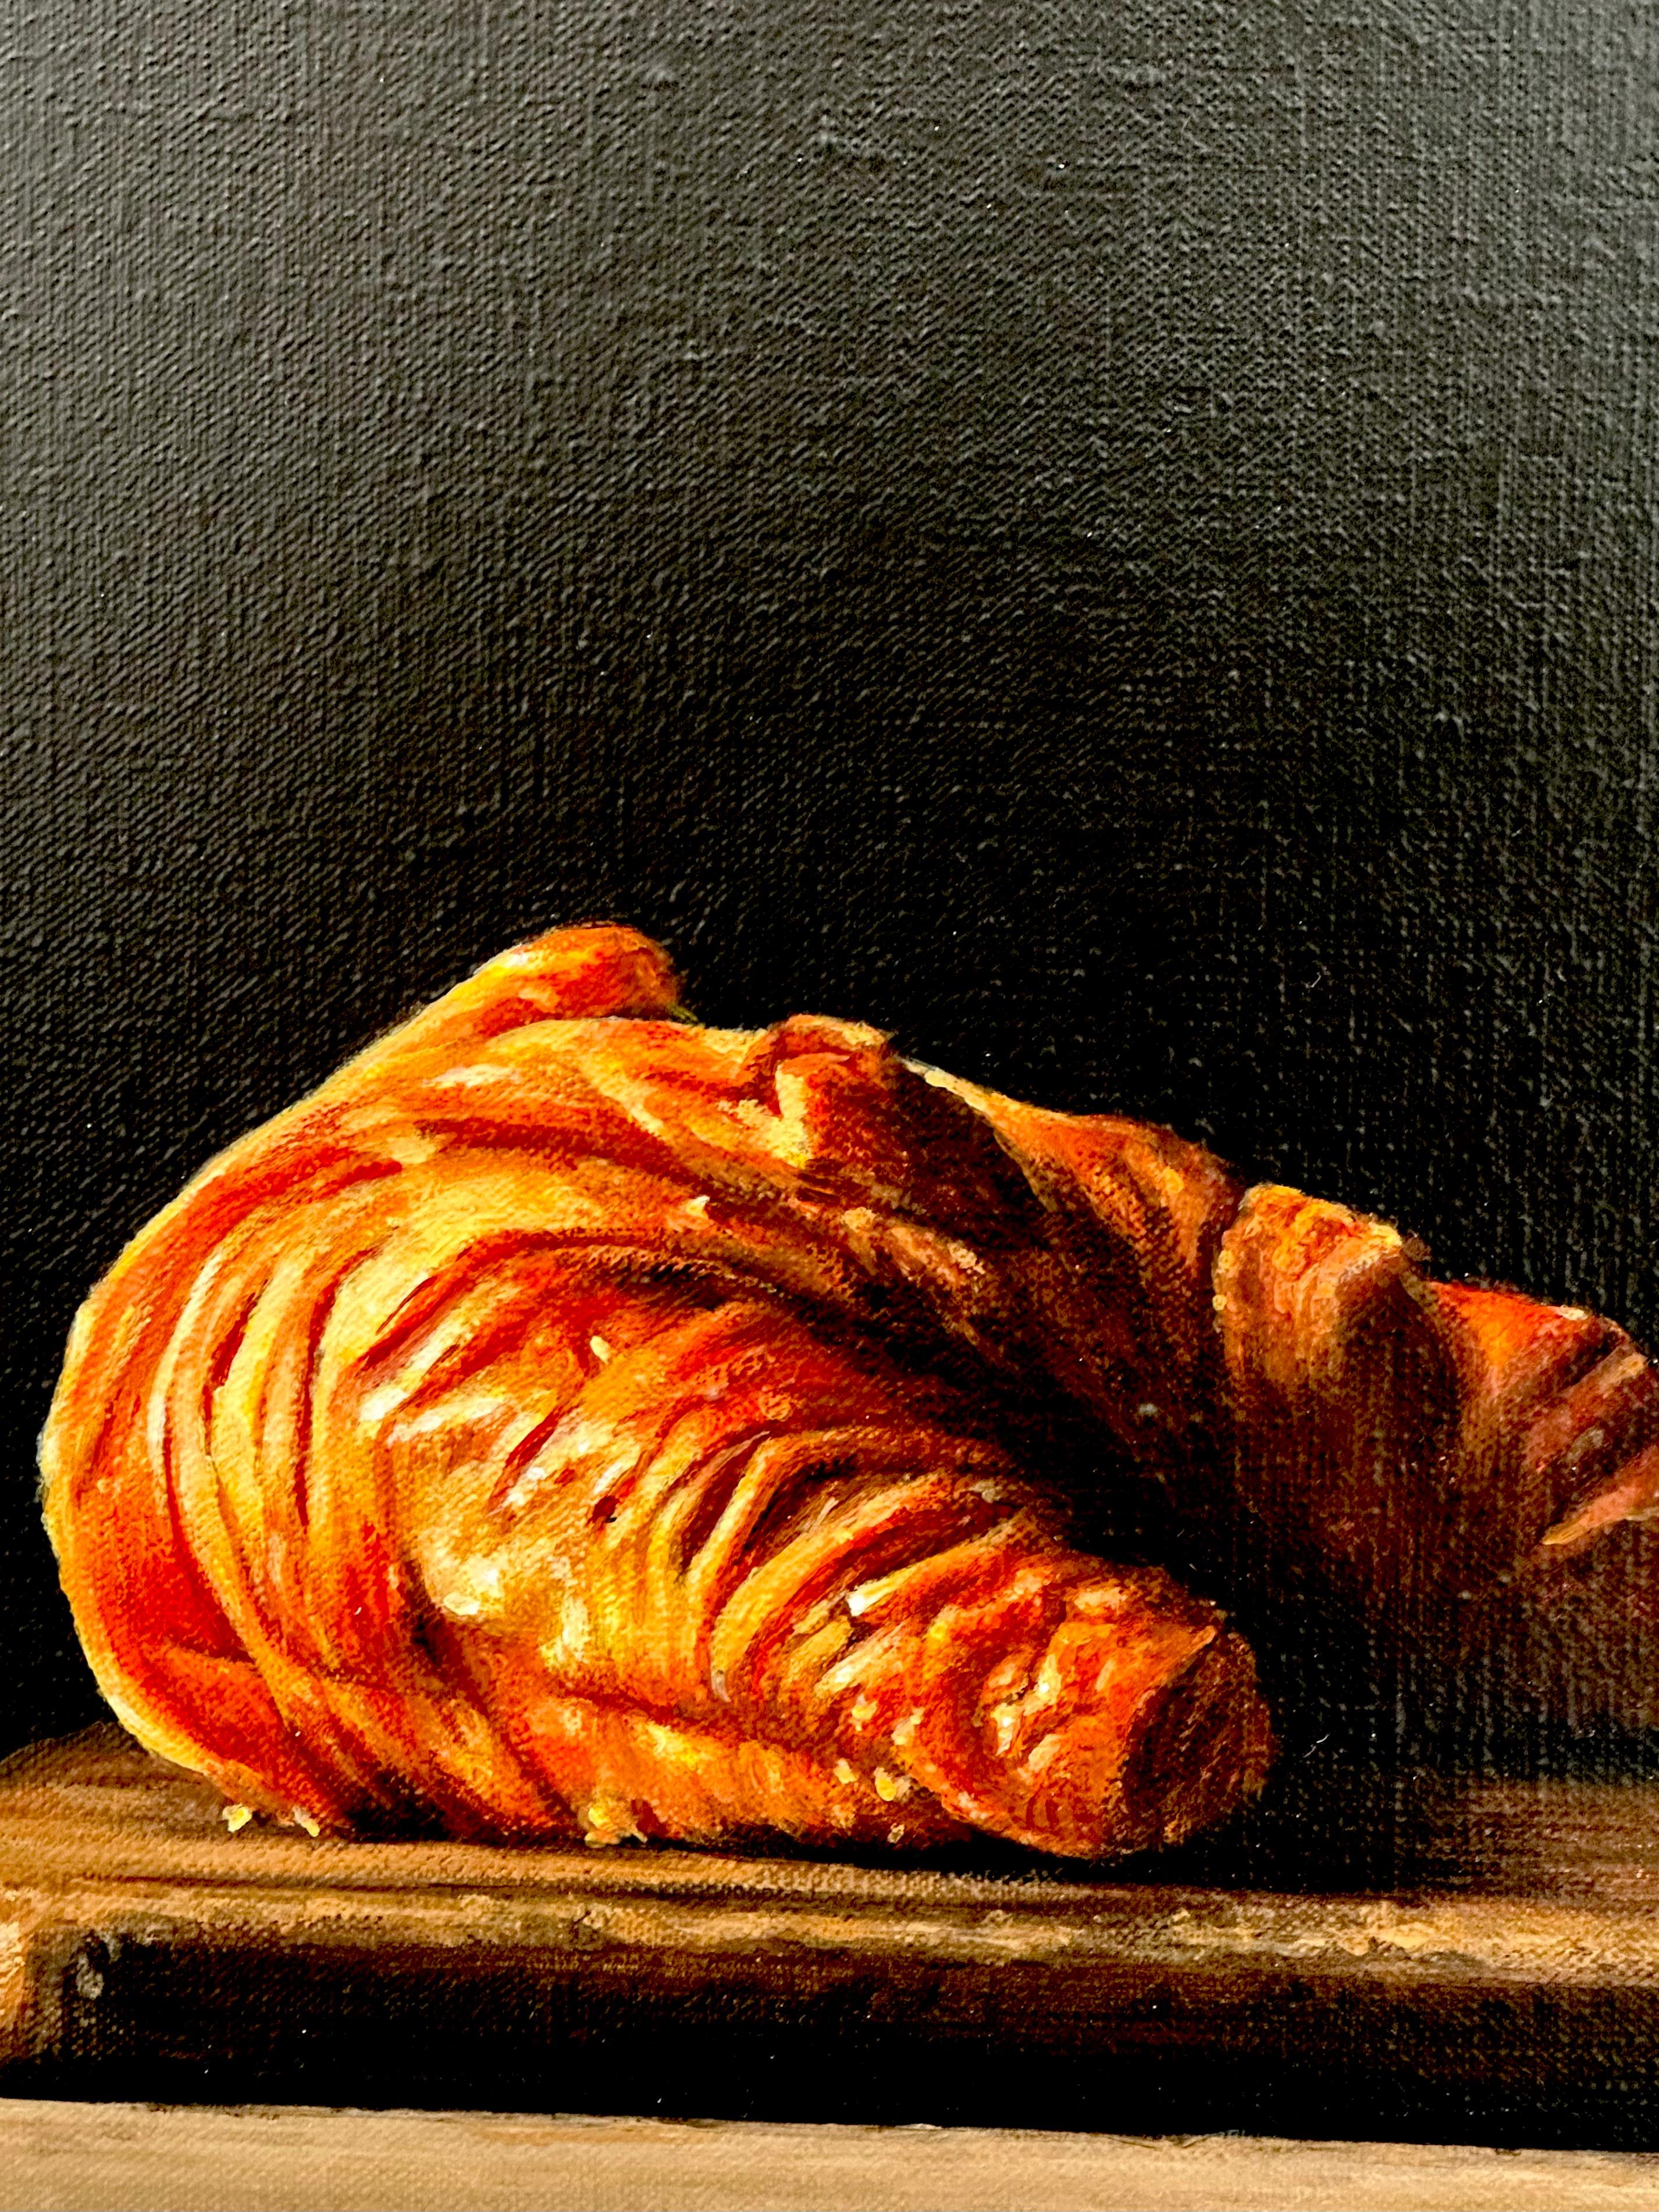 Coffee with Croissant- 21st Contemporary Hyper Realistic Still-life painting - Black Figurative Painting by Heidi von Faber